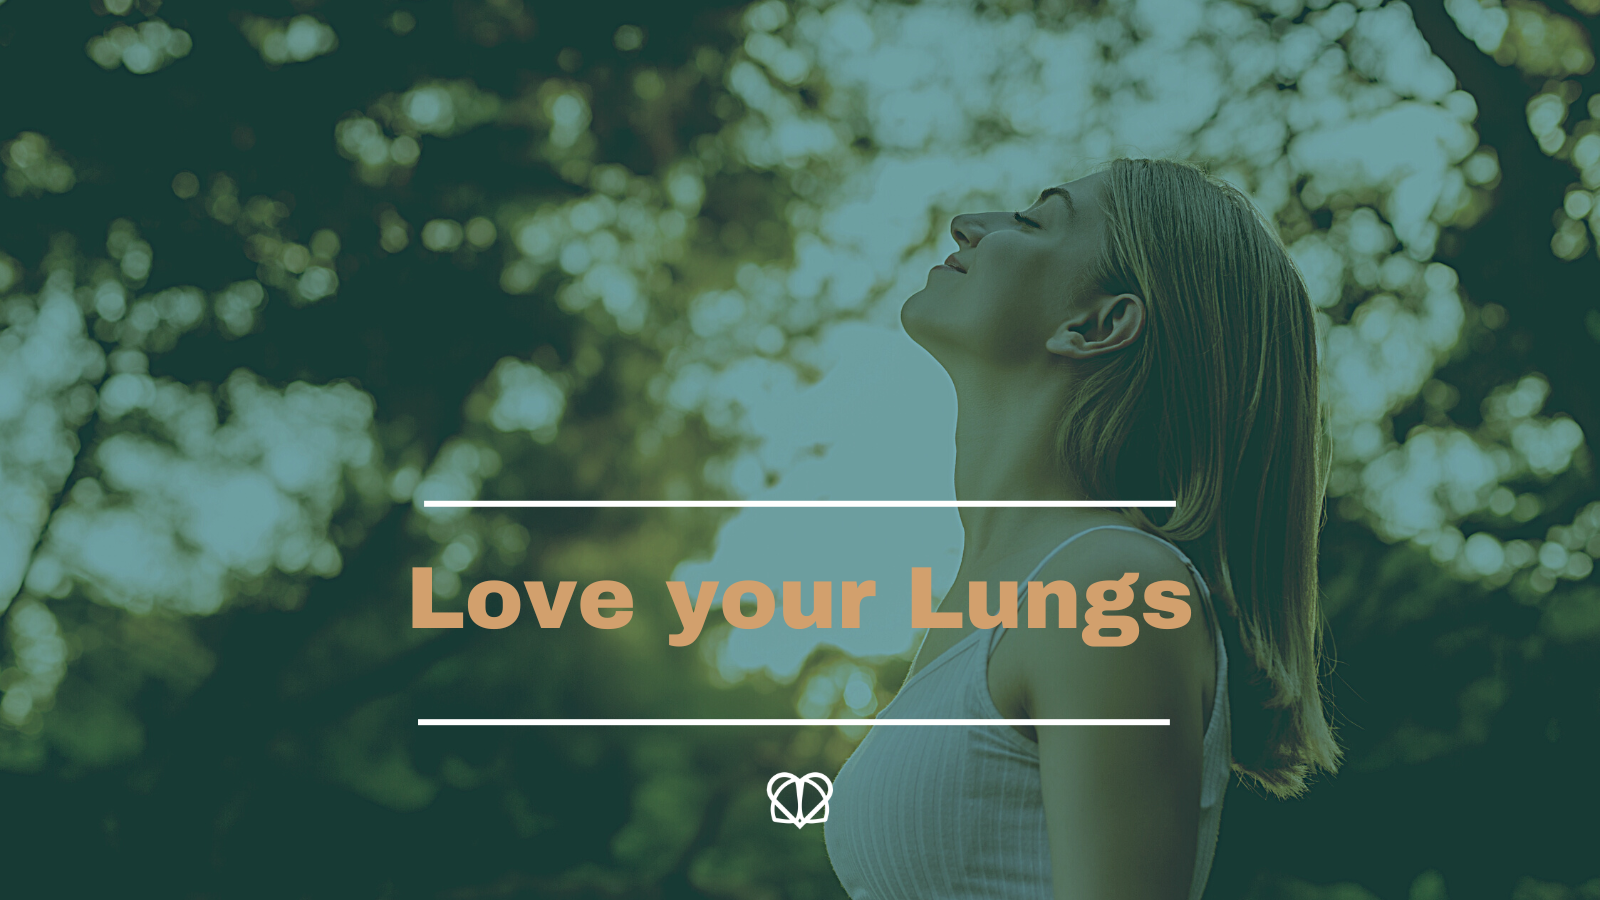 Love your lungs